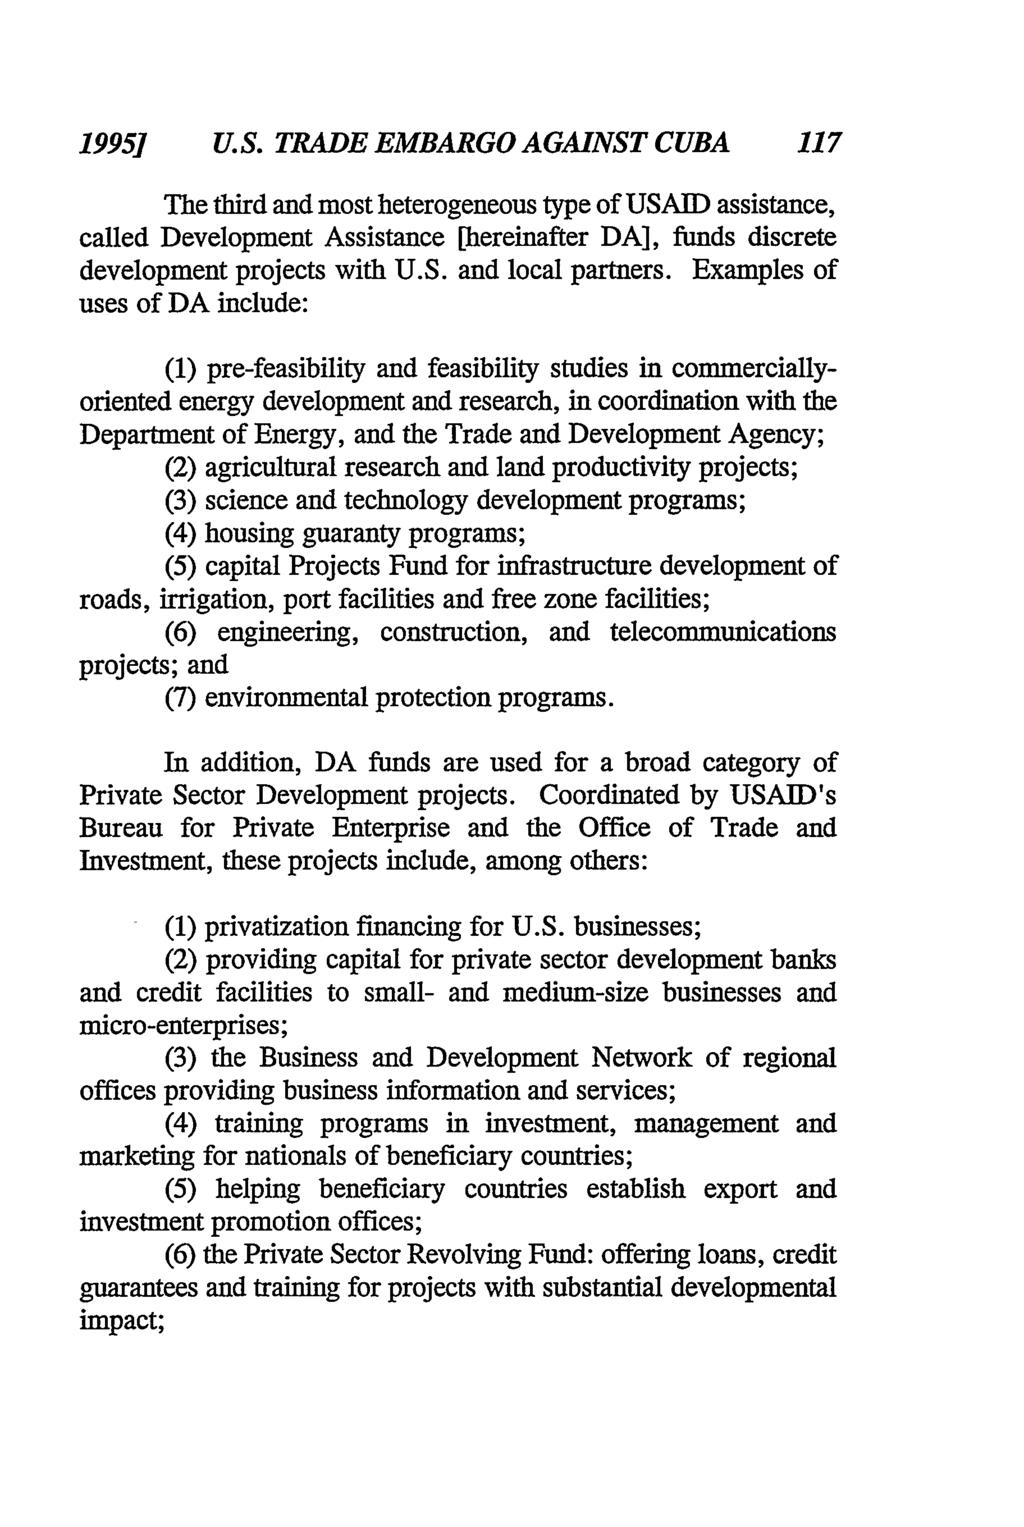 19951 U.S. TRADE EMBARGO AGAINST CUBA 117 The third and most heterogeneous type of USAID assistance, called Development Assistance [hereinafter DA], funds discrete development projects with U.S. and local partners.